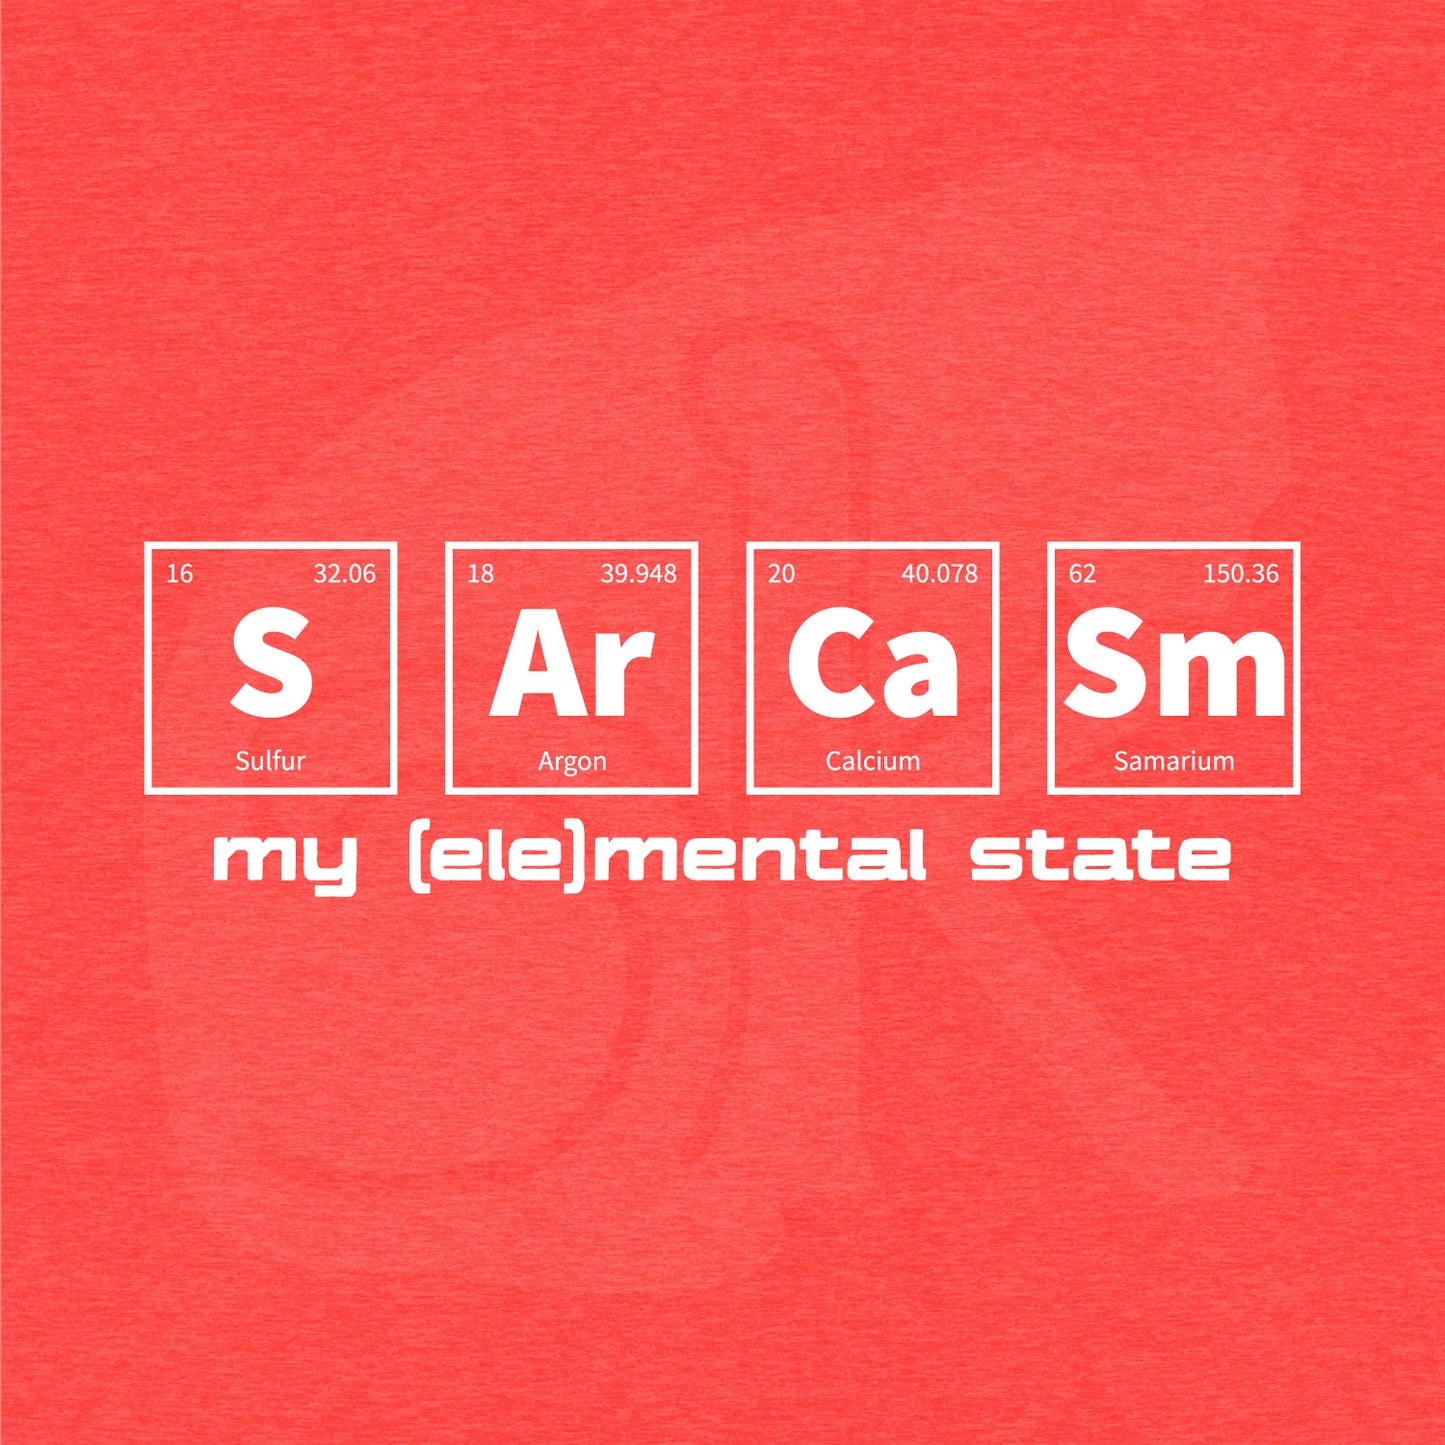 Watermarked standalone graphic of periodic table of elements symbols for Sulfur (S), Argon (Ar), Calcium (Ca), and Samarium (Sm) and text "my (ele)mental state"